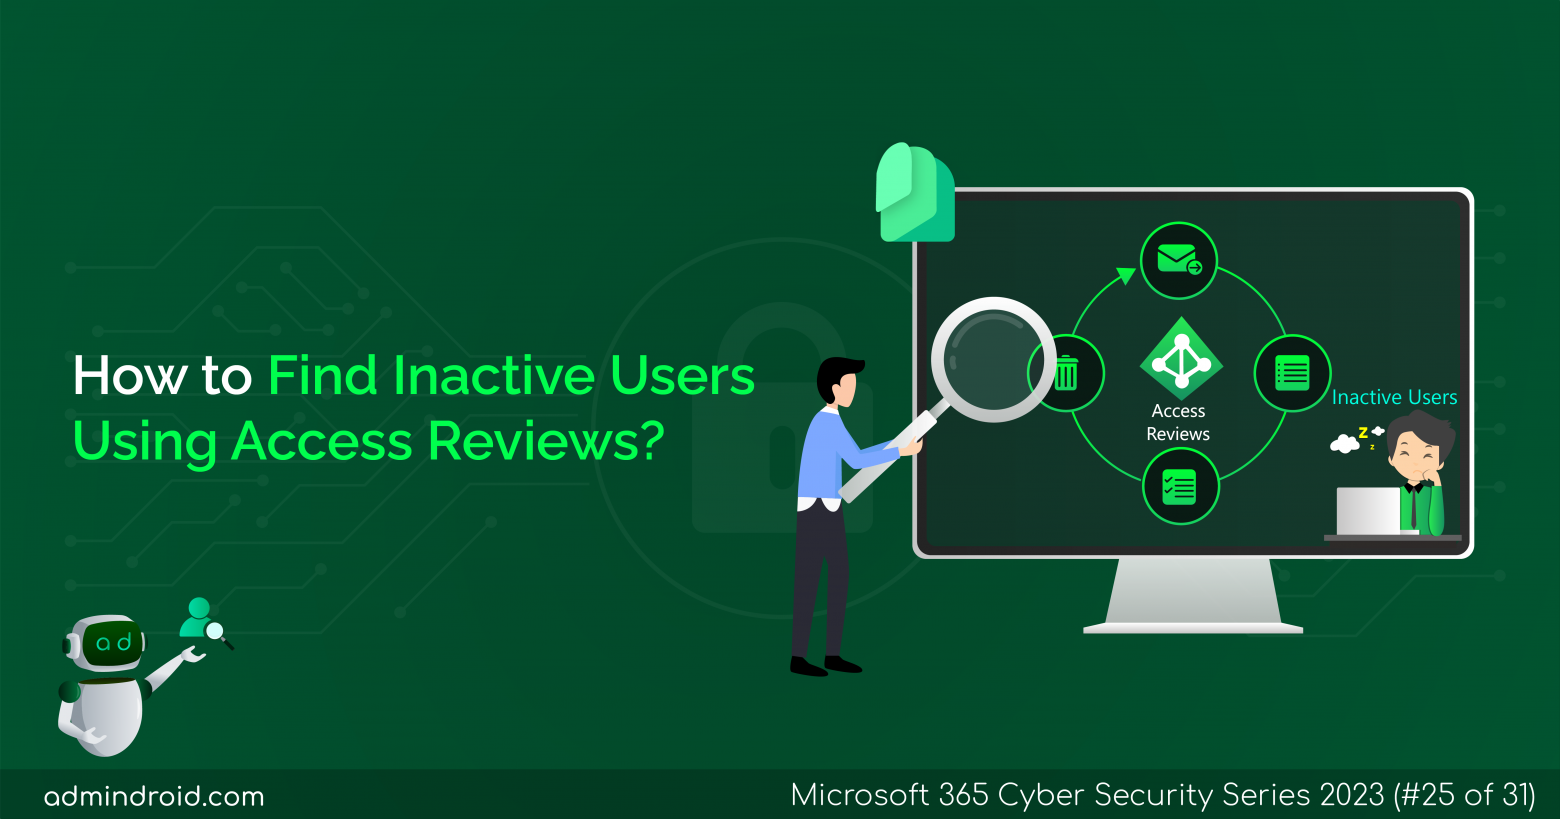 How to Find Inactive Users Using Access Reviews